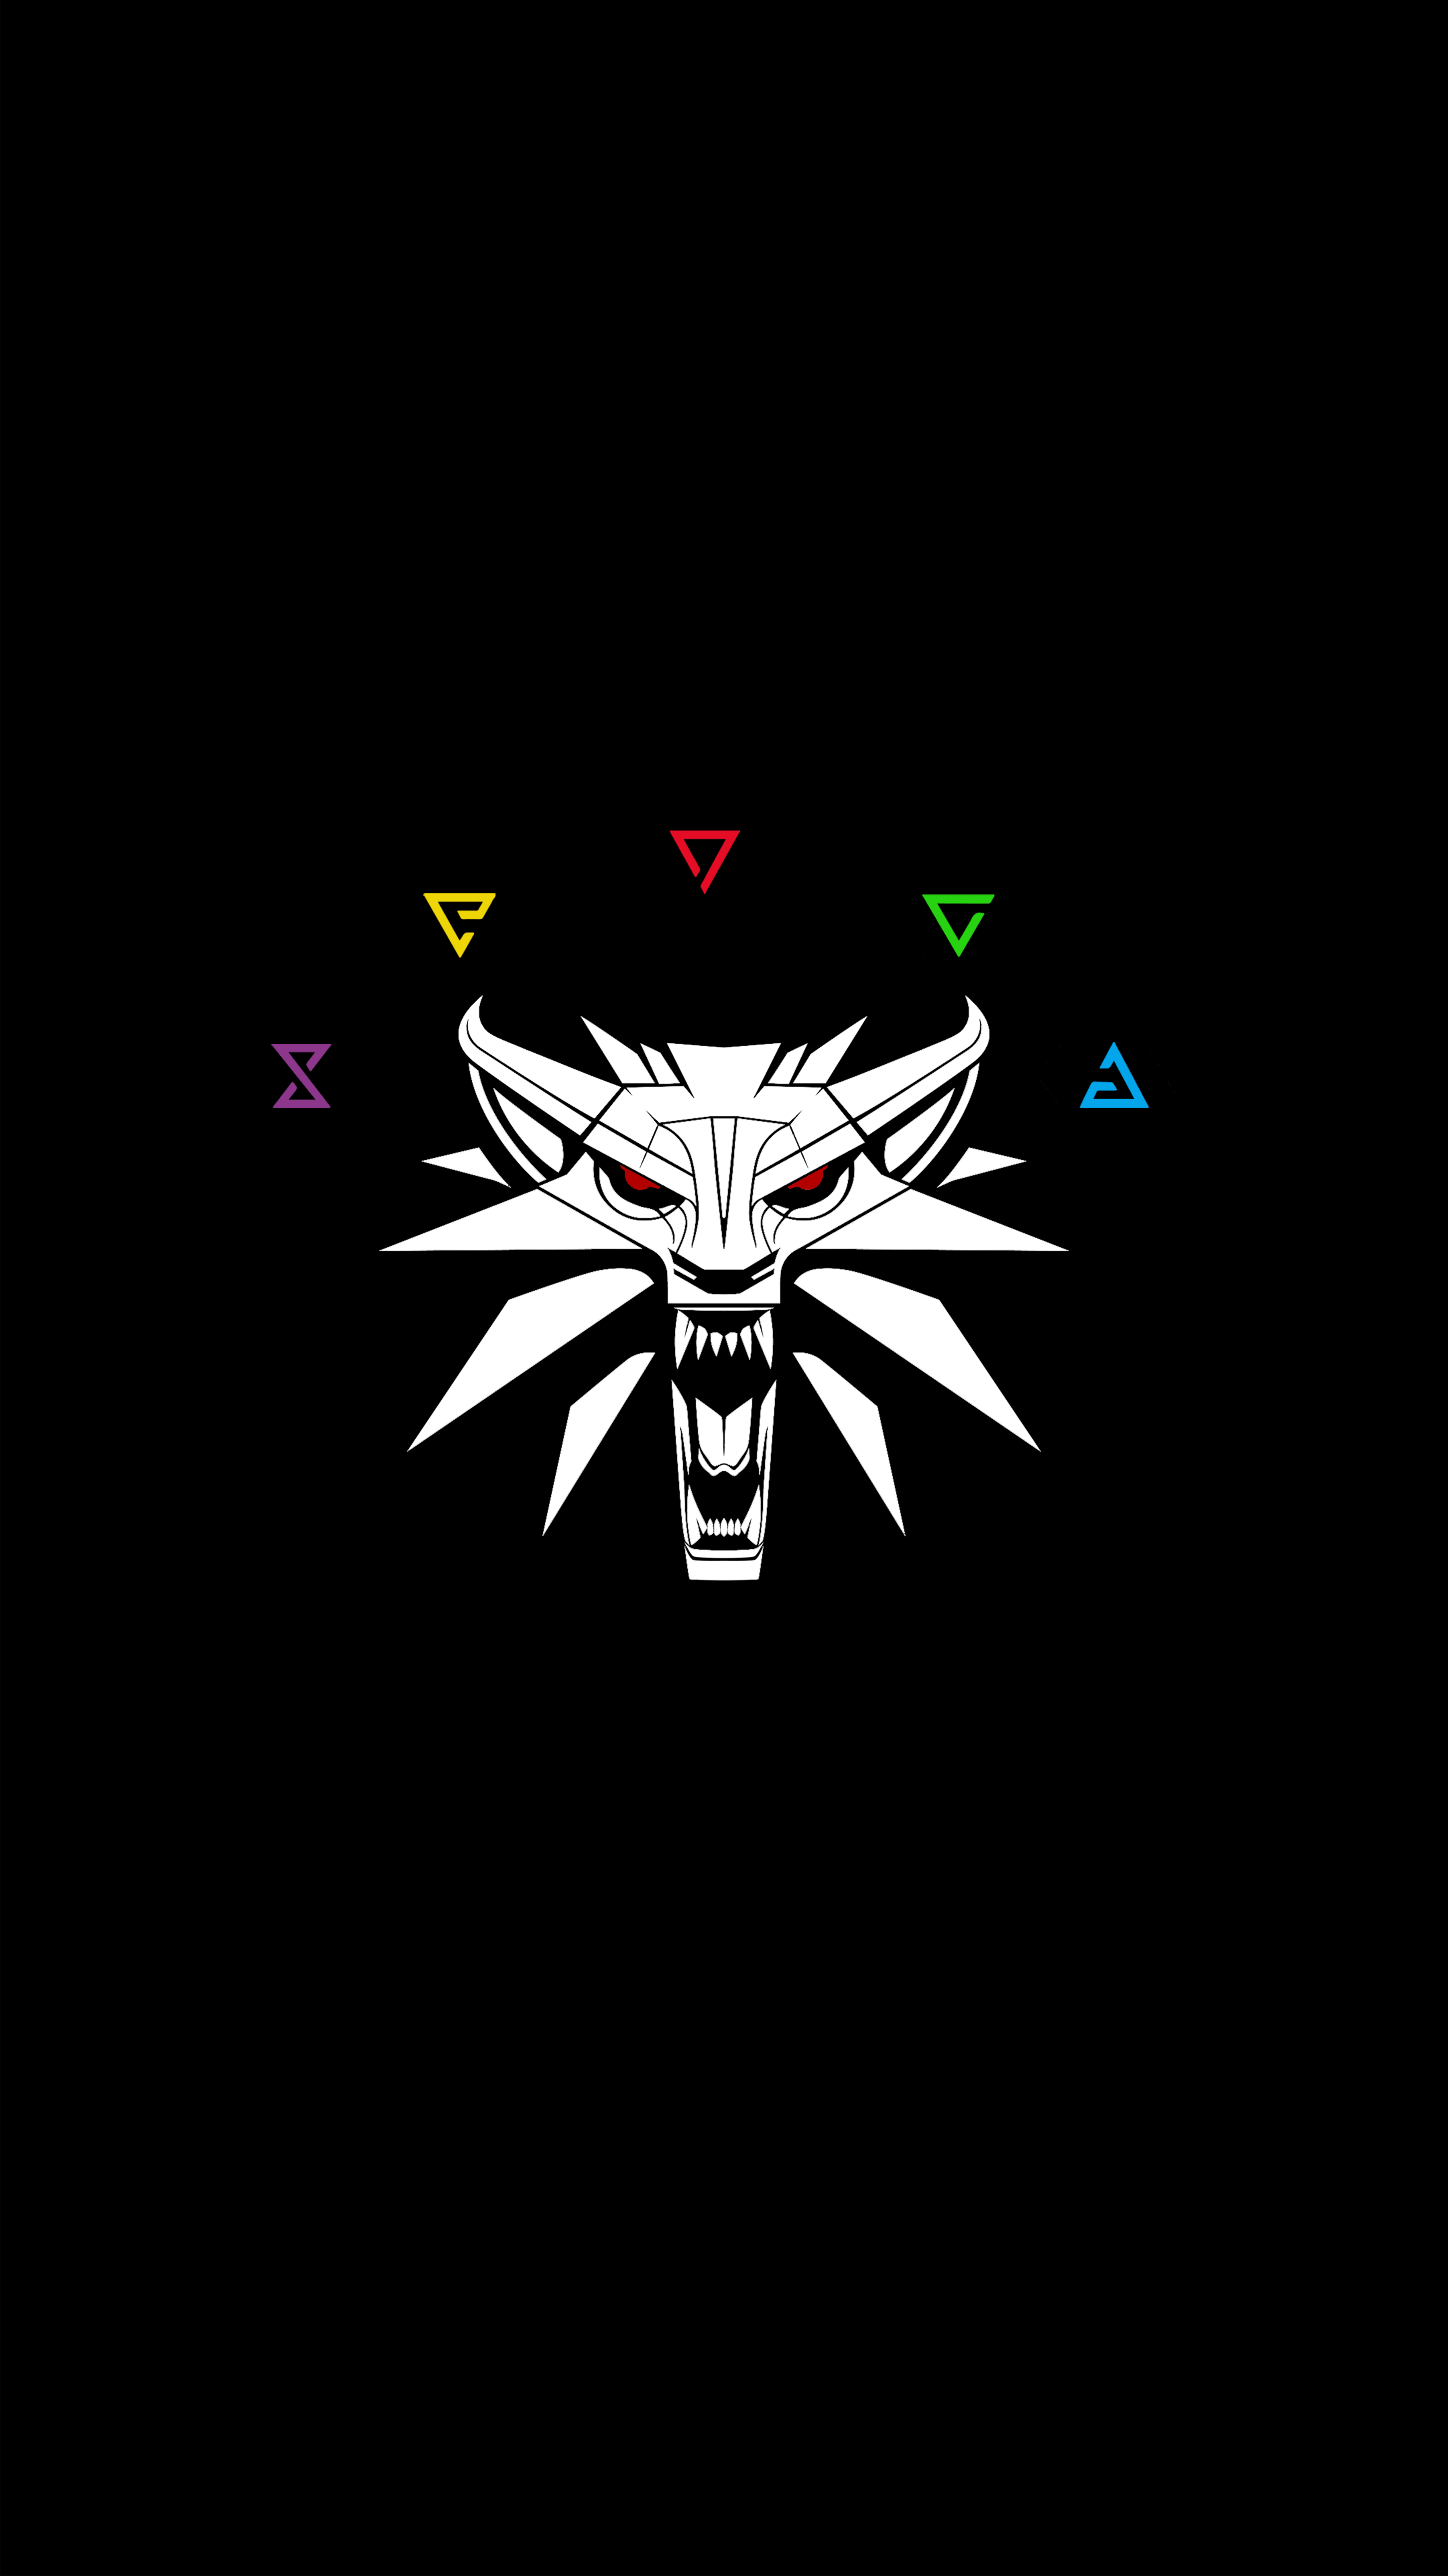 Wolf Medallion Phone Wallpaper #TheWitcher3 #PS4 #WILDHUNT #PS4share